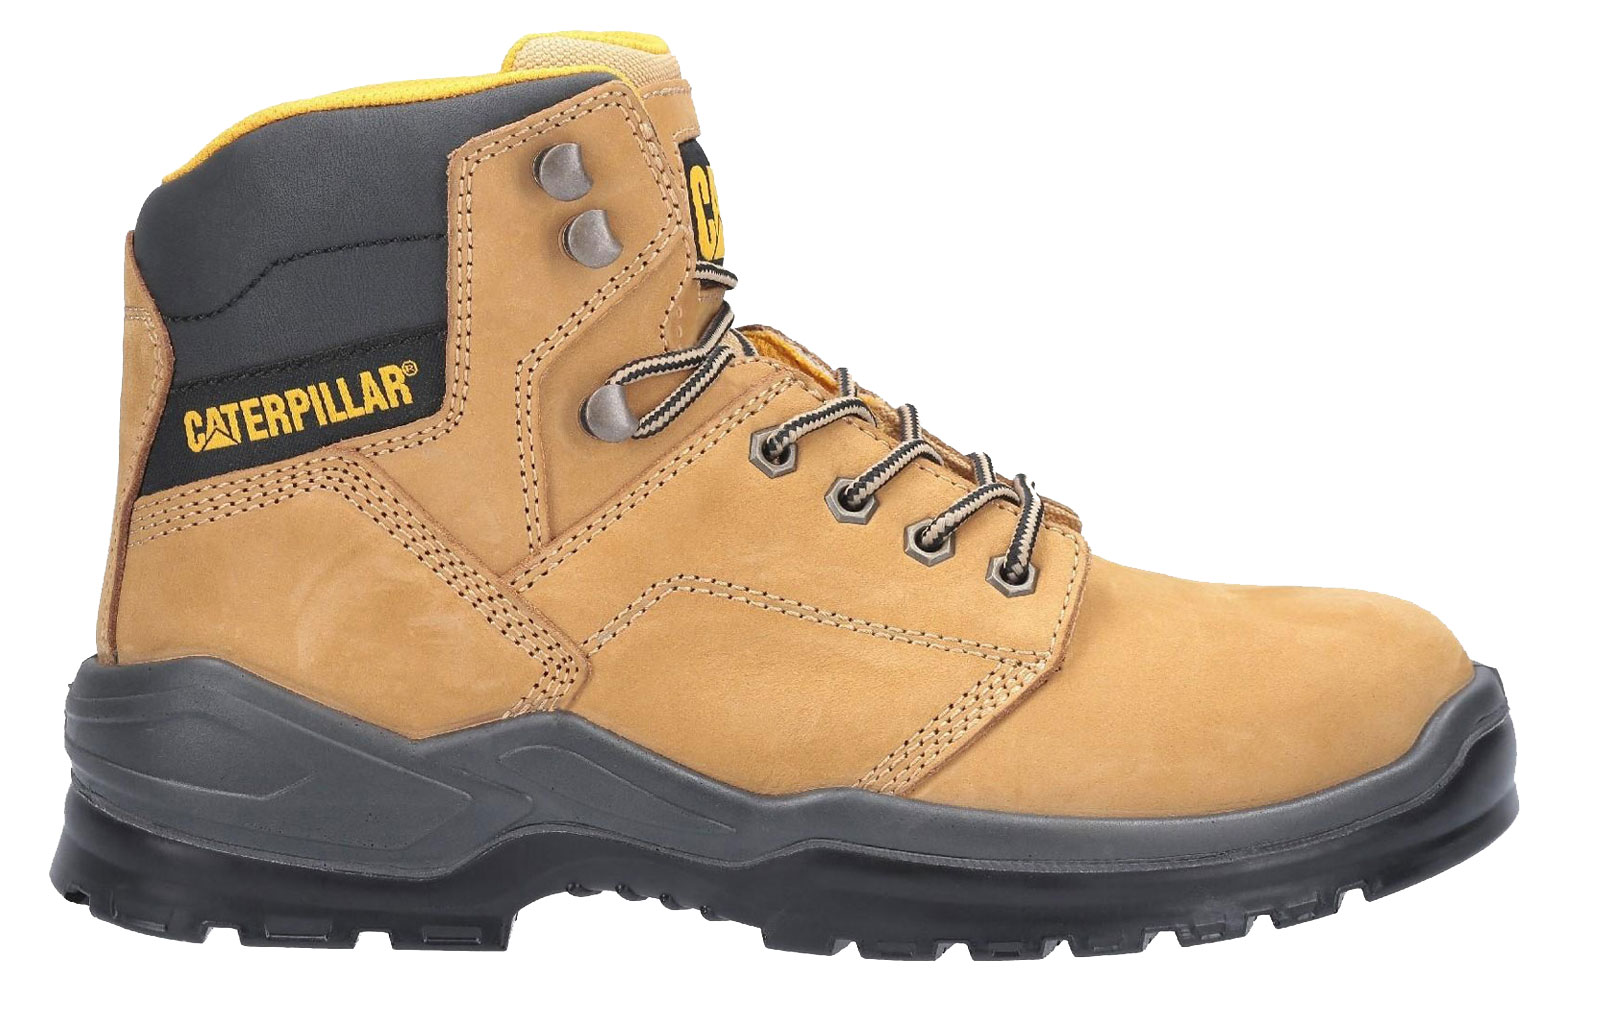 Caterpillar Striver S3 Safety Boots Mens - GRD-30703-52449-03